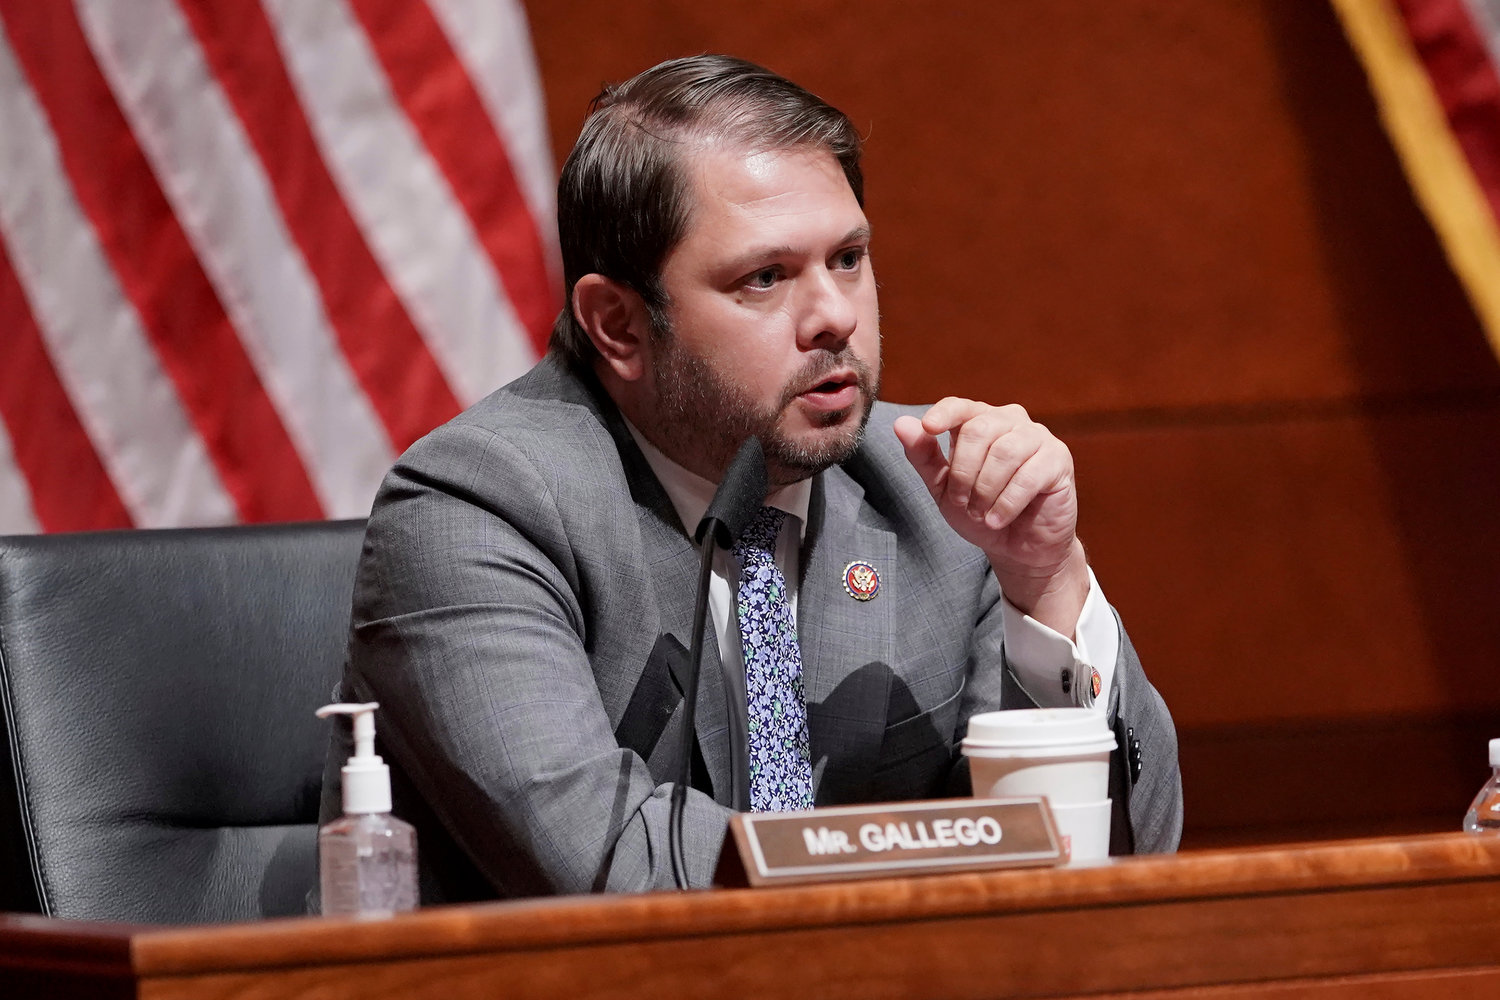 Rep. Ruben Gallego, D-Ariz., speaks during a House Armed Services Committee hearing on July 9, 2020, on Capitol Hill in Washington. In 2024 Sen. Kyrsten Sinema, D-Ariz., will be up for reelection. Sinema's most prominent potential primary challenger is Gallego, who has a long history of feuding with Sinema. Gallego has not announced his plans for 2024 but has made it no secret that he's thinking about challenging Sinema. He even raised money on the prospect he might oppose Sinema.